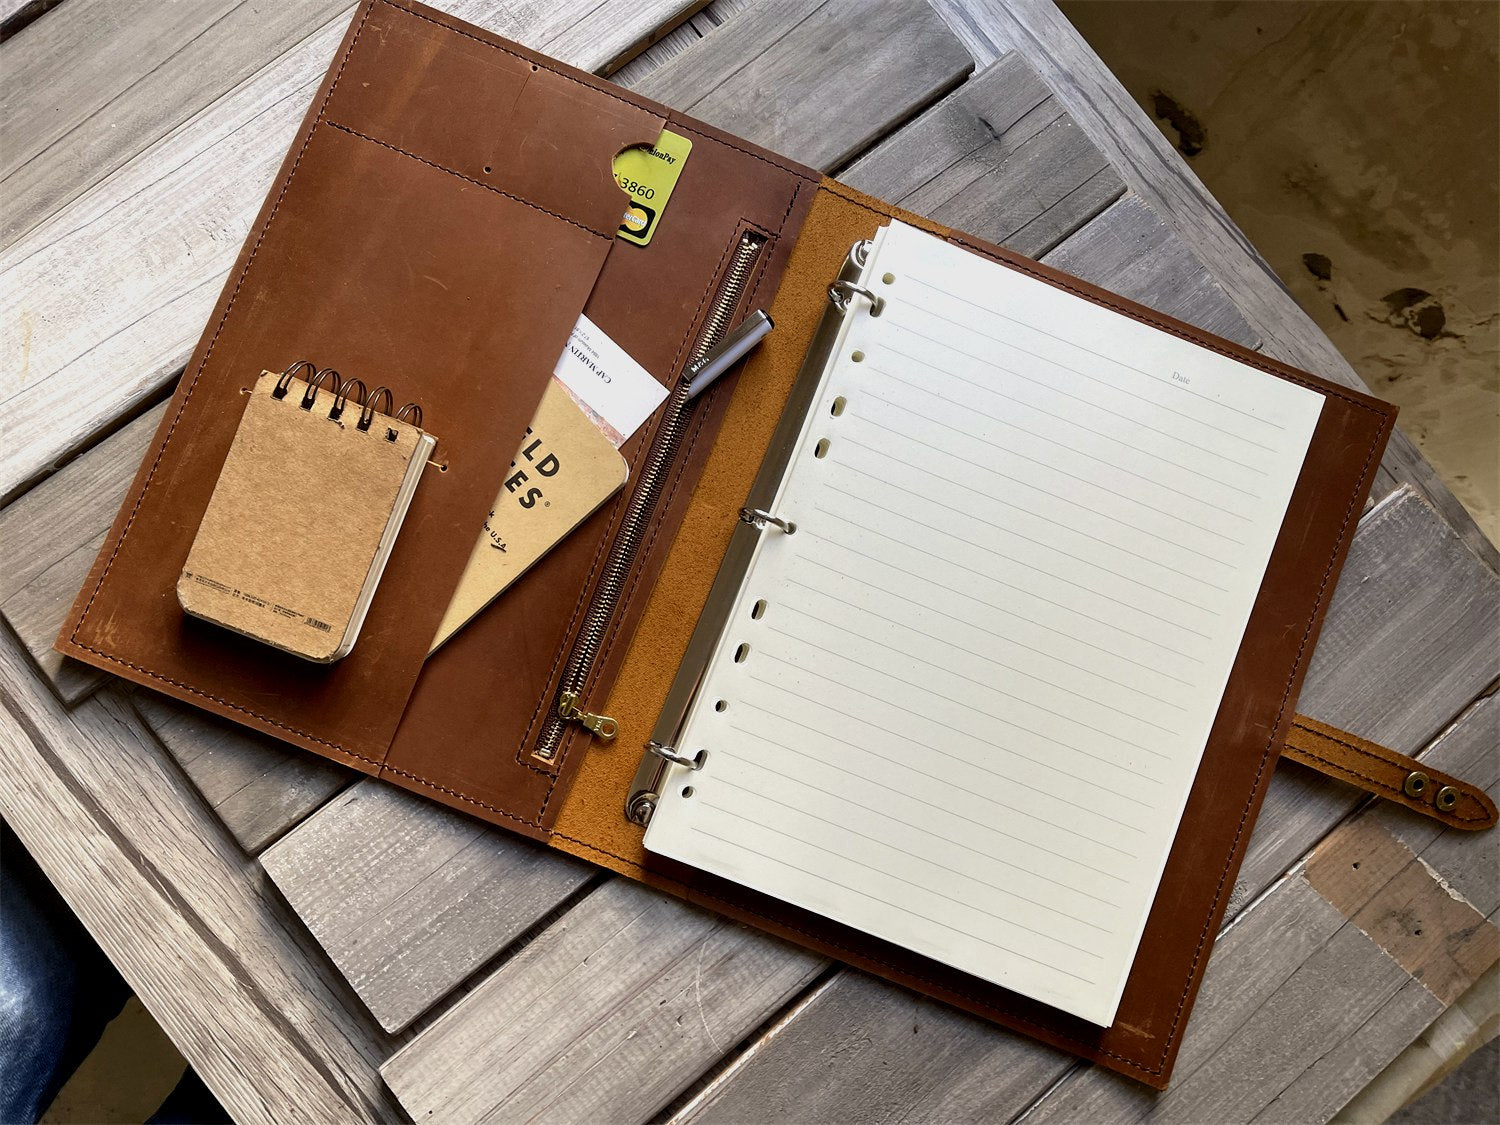 What's the difference between a Diary and a Journal?